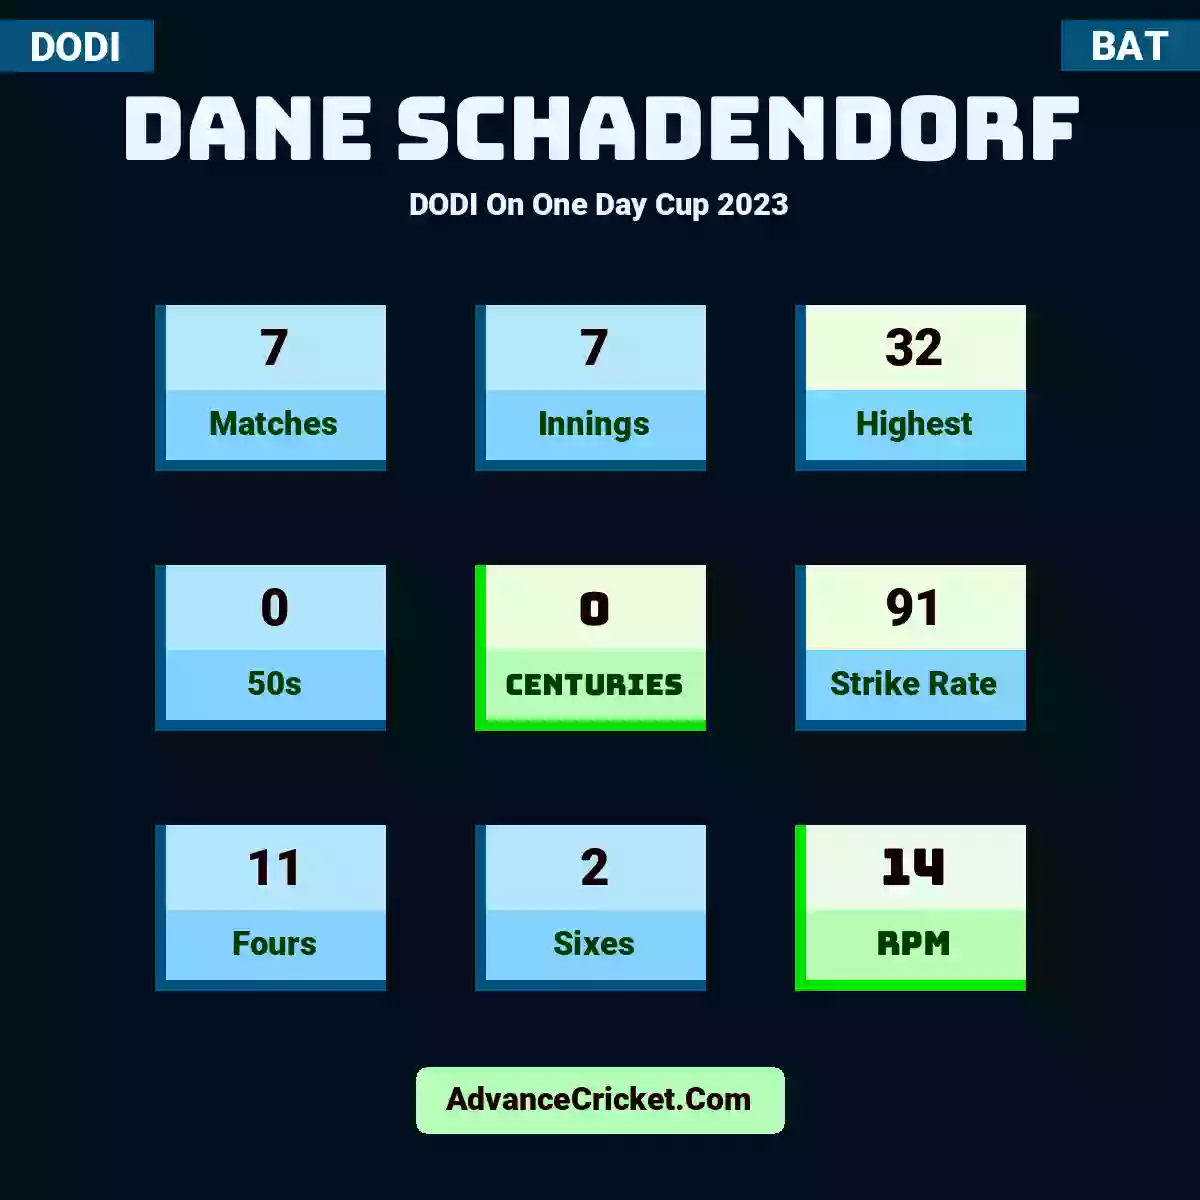 Dane Schadendorf DODI  On One Day Cup 2023, Dane Schadendorf played 7 matches, scored 32 runs as highest, 0 half-centuries, and 0 centuries, with a strike rate of 91. D.Schadendorf hit 11 fours and 2 sixes, with an RPM of 14.